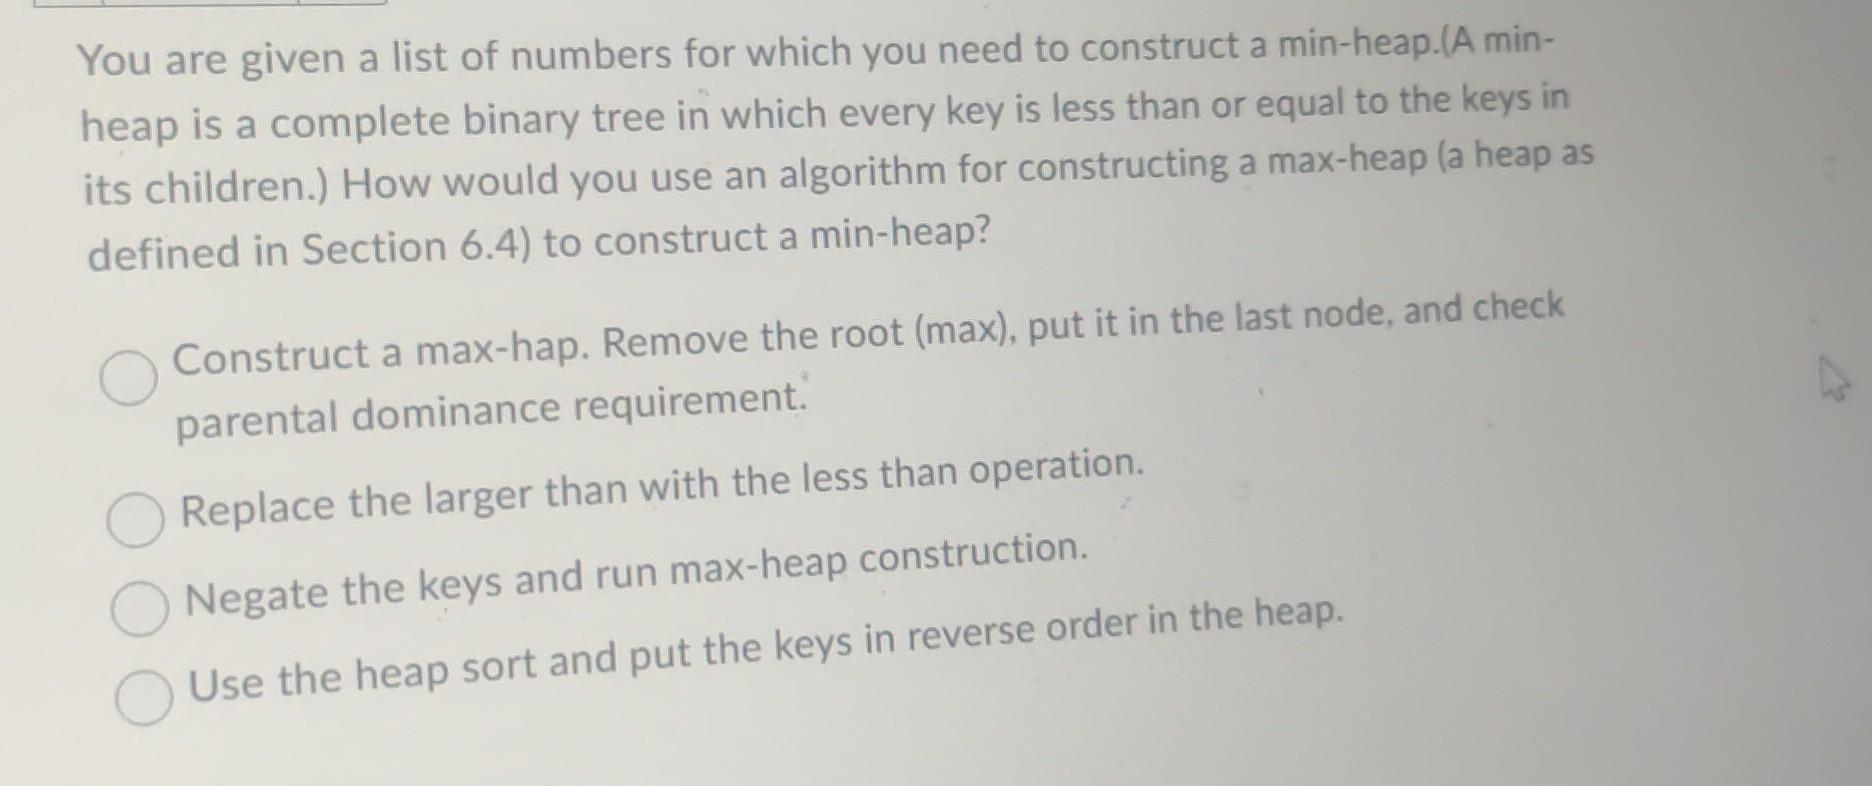 You are given a list of numbers for which you need to construct a min-heap.(A min- heap is a complete binary